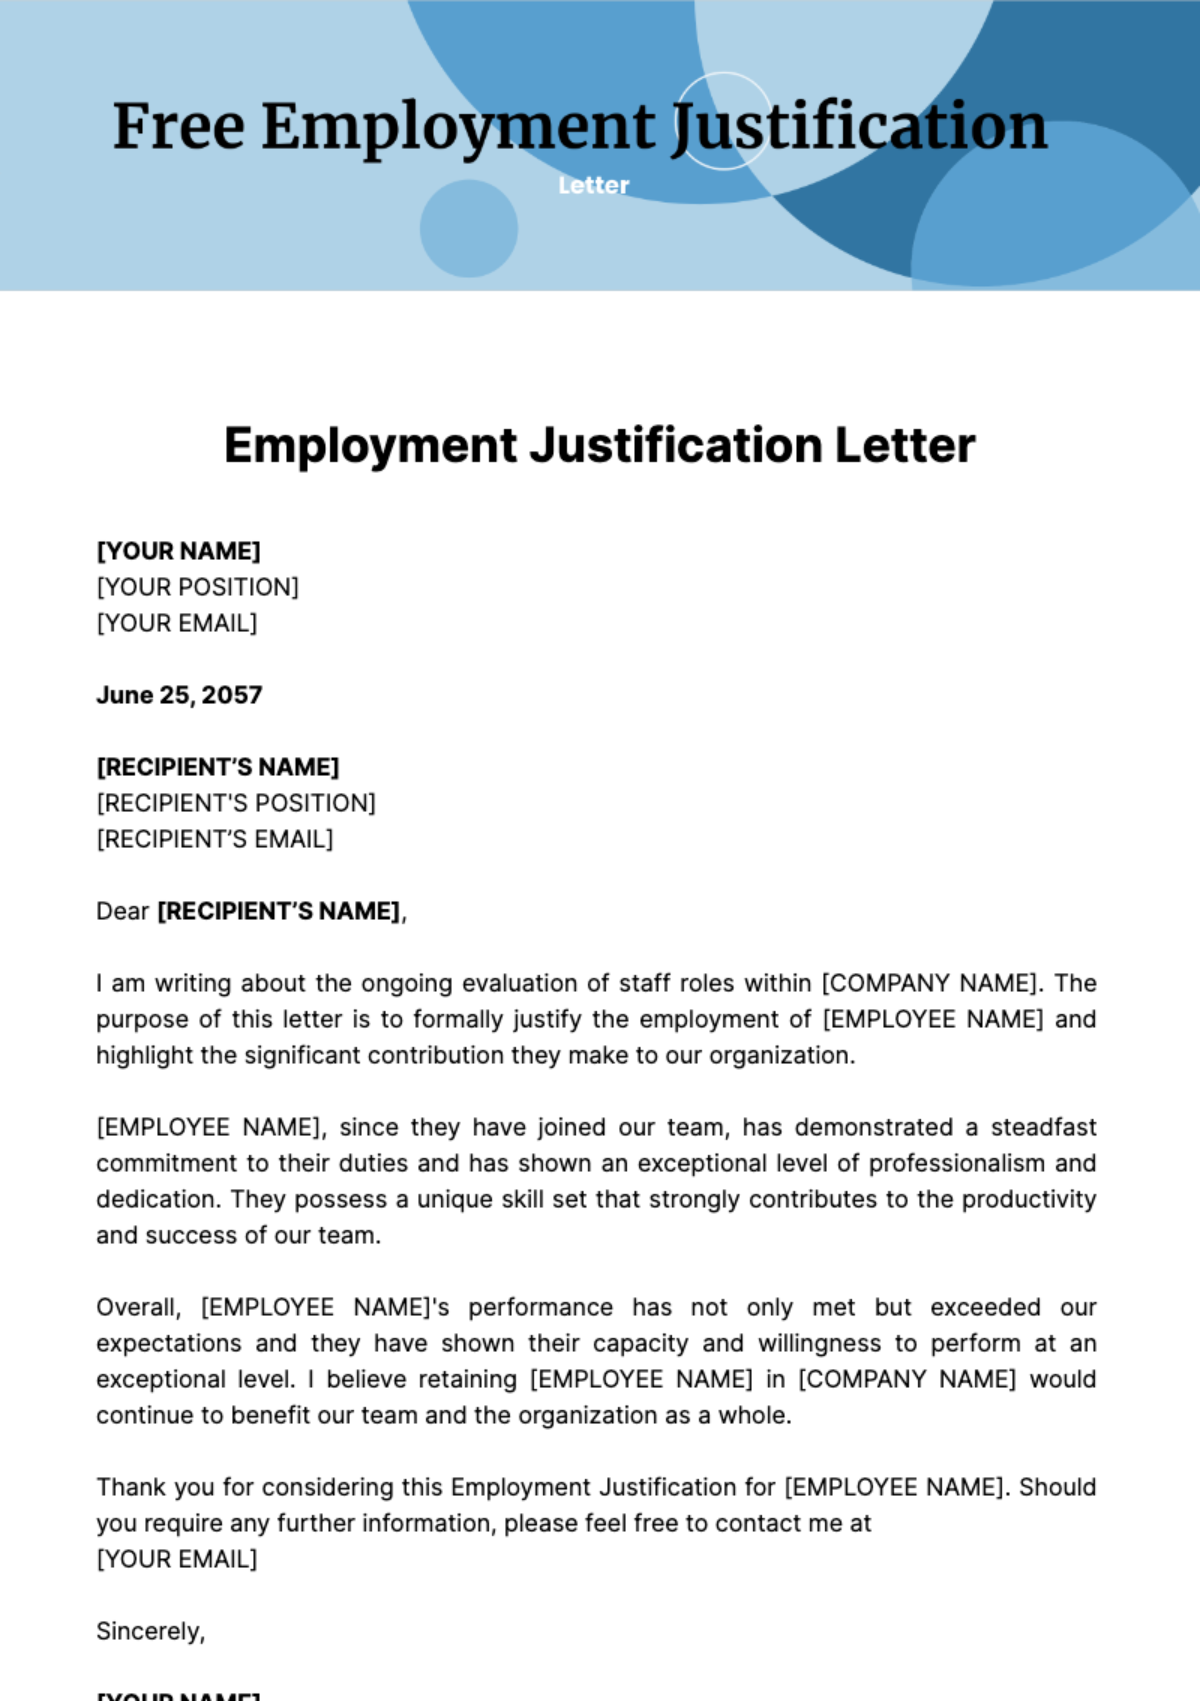 Free Employment Justification Letter Template